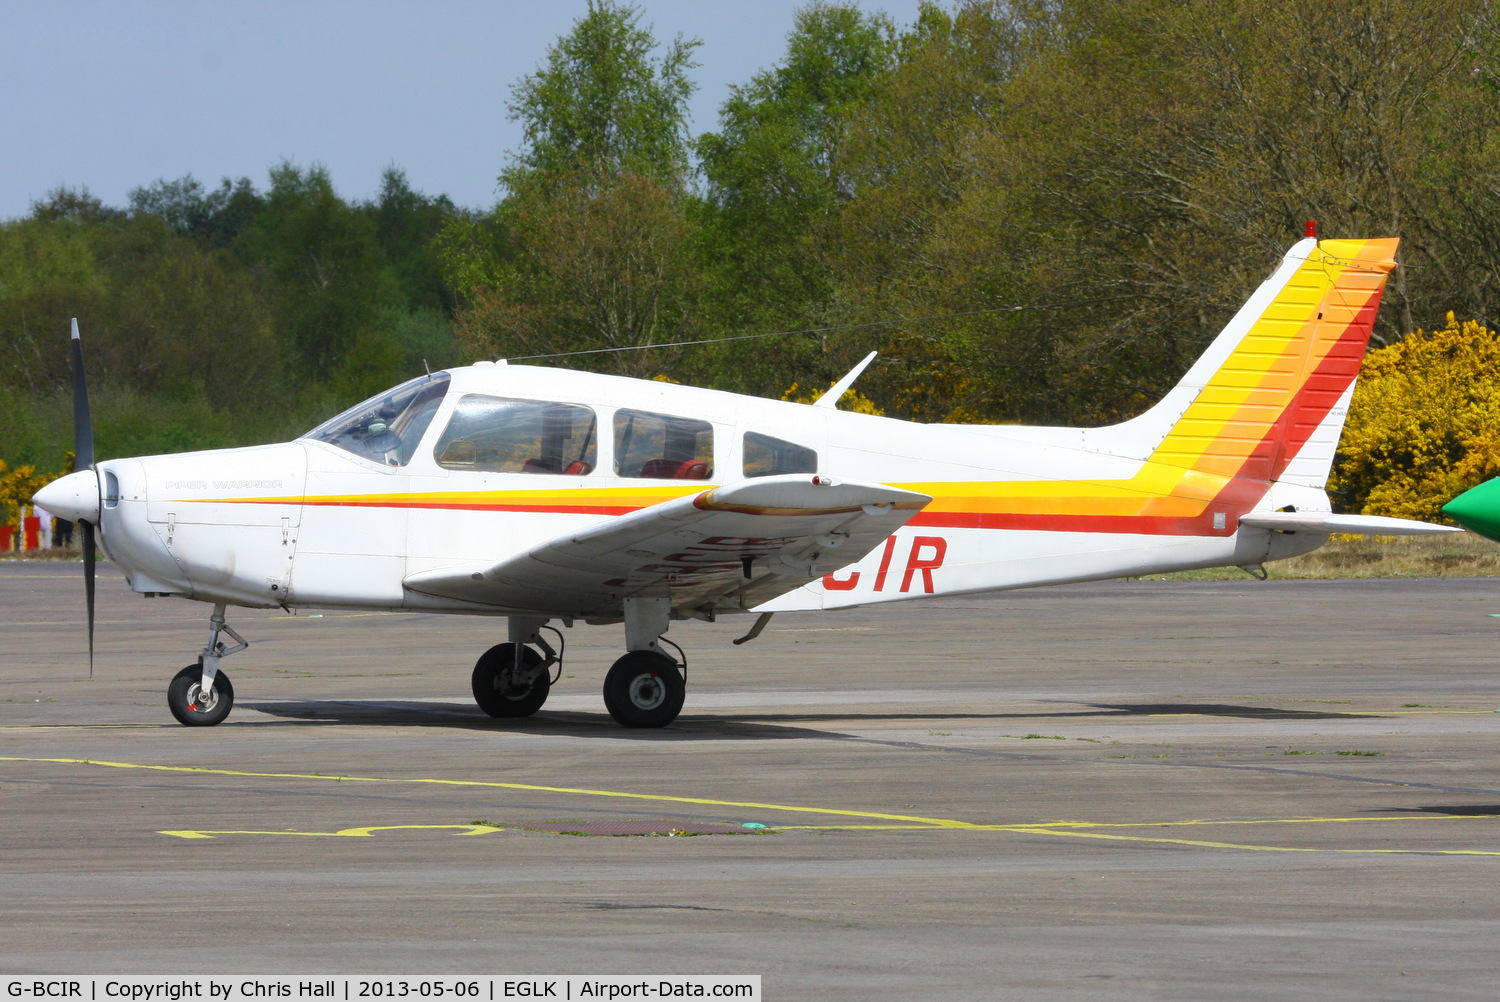 G-BCIR, 1974 Piper PA-28-151 Cherokee Warrior C/N 28-7415401, privately owned